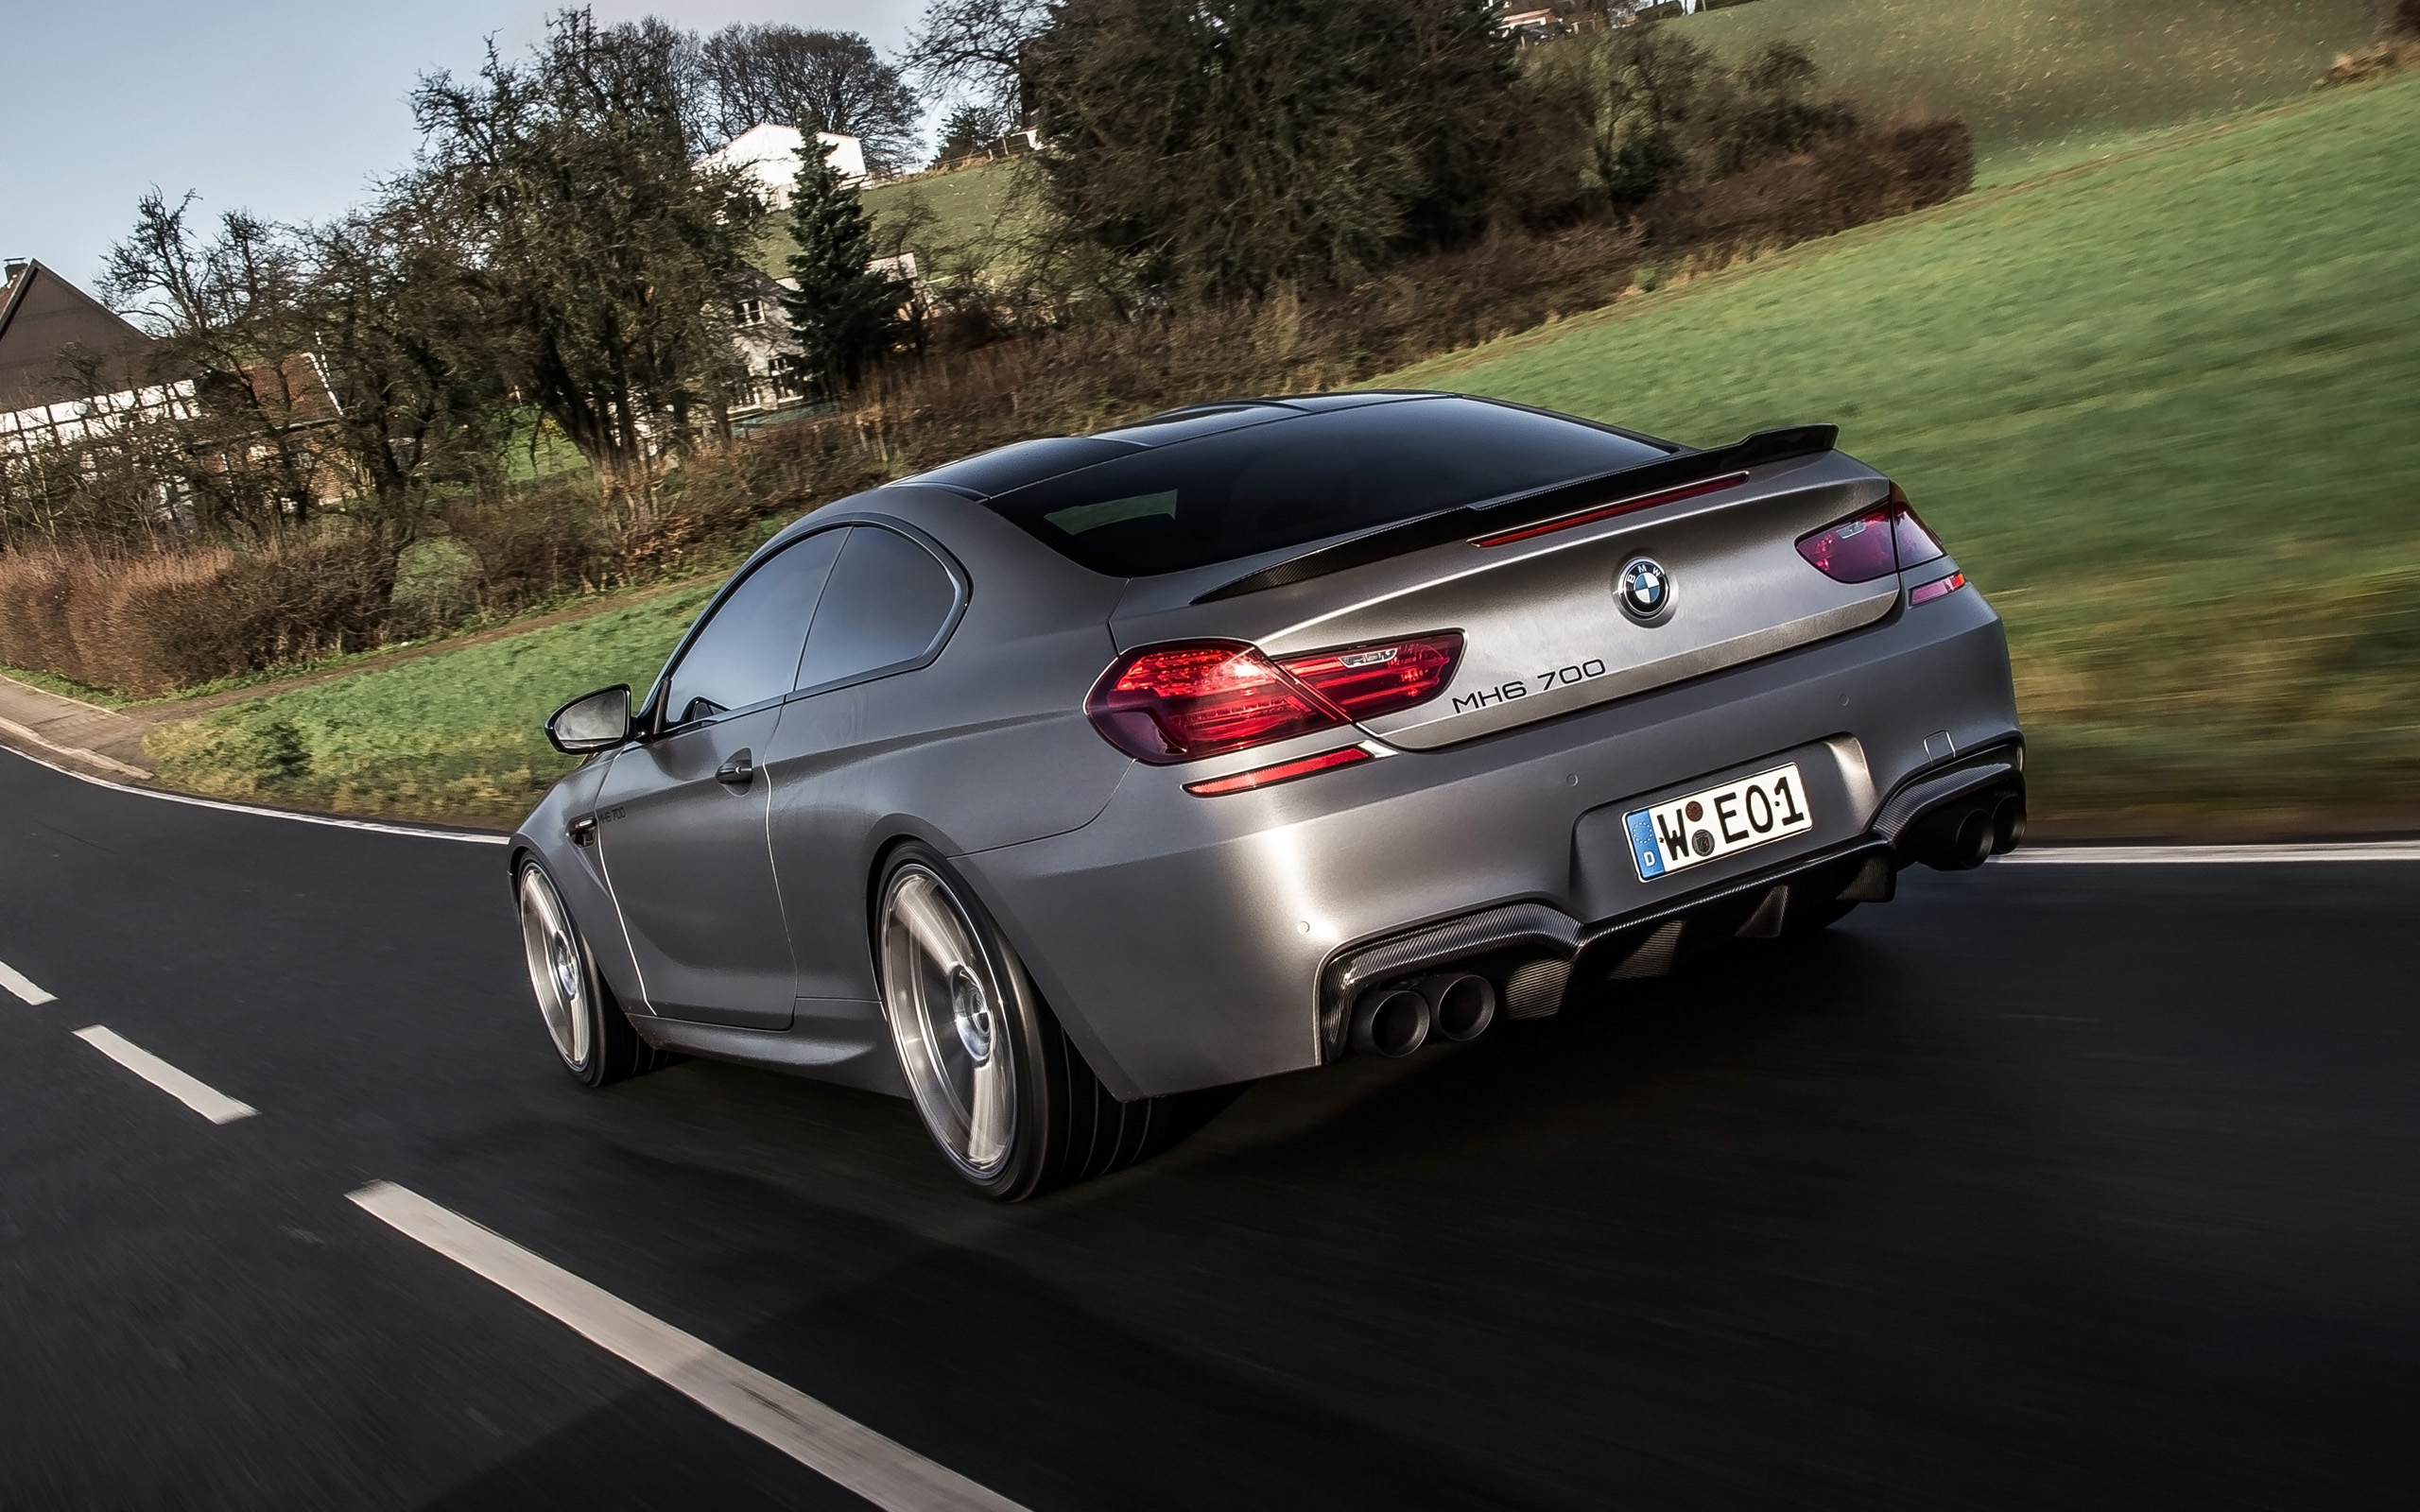 2014 Manhart Performance Bmw M 6 Mh6 700 Tuning Wallpapers Images, Photos, Reviews